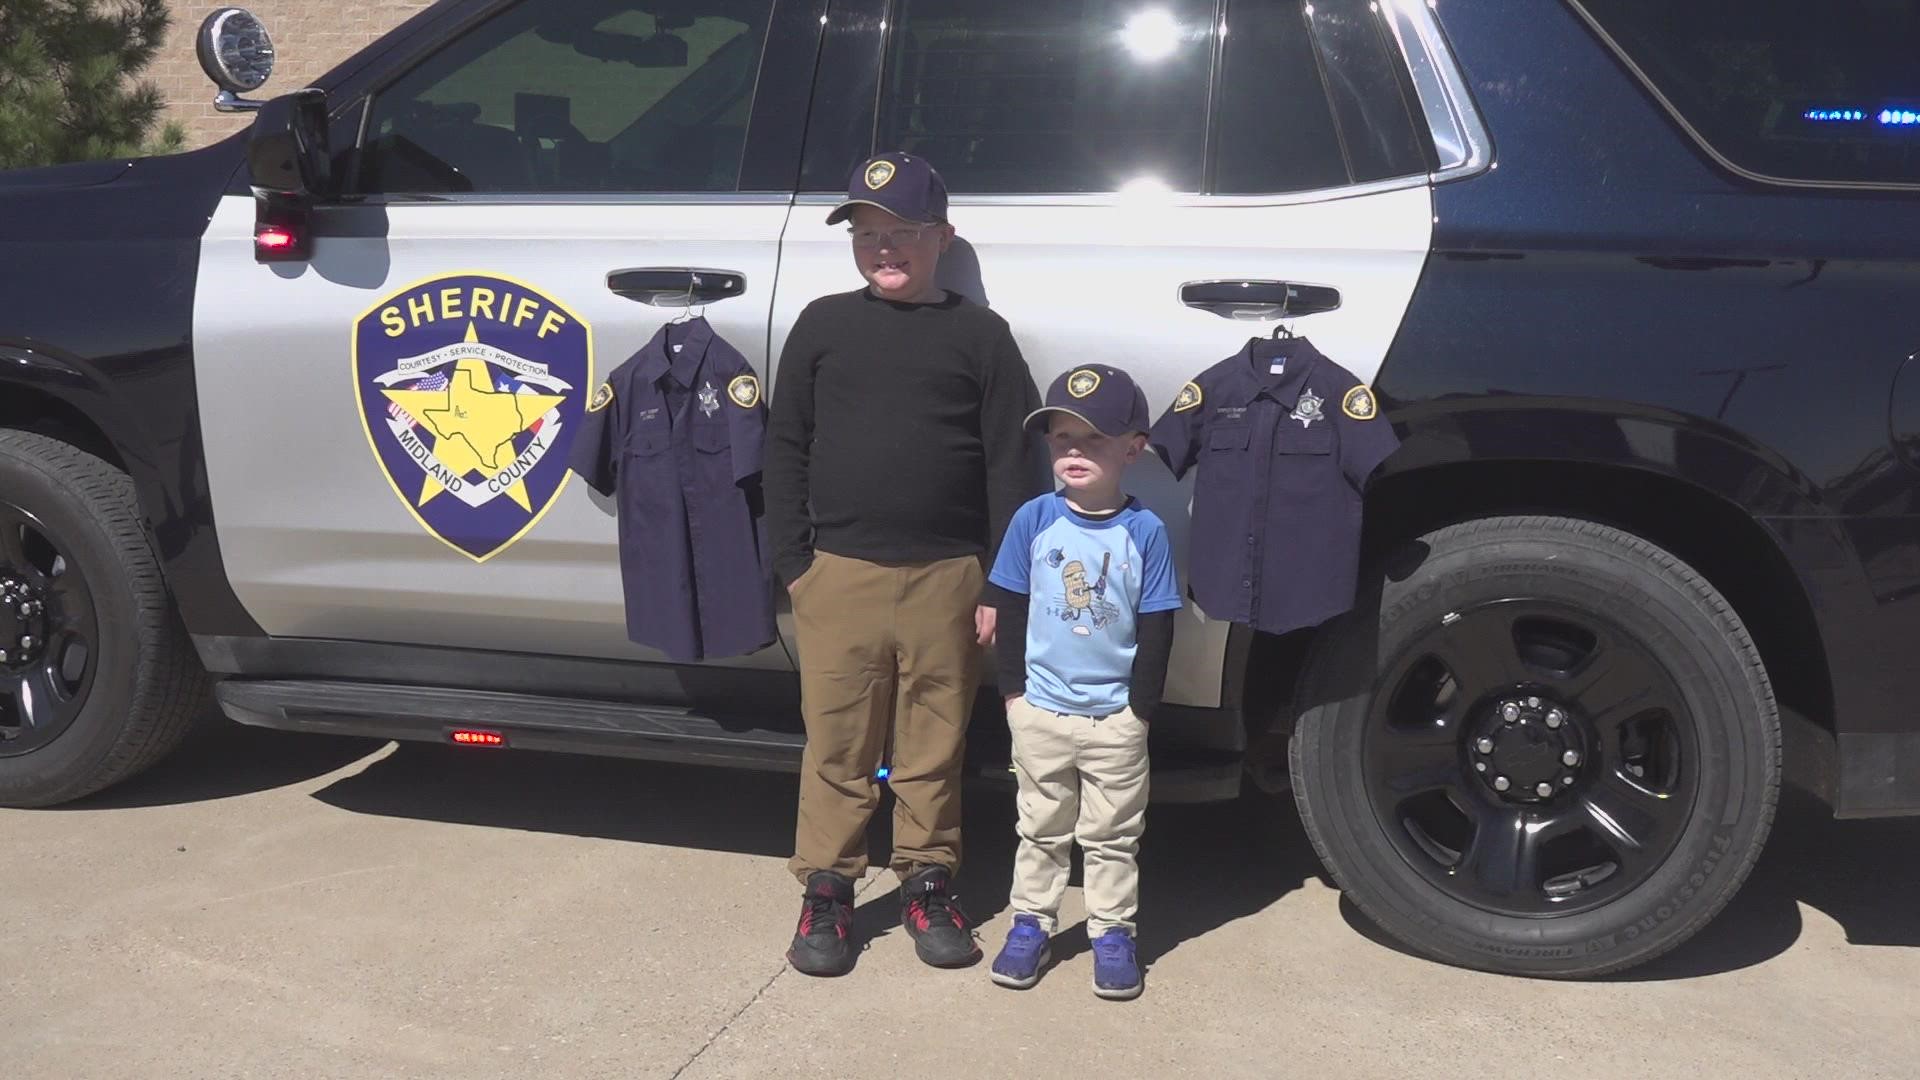 6-year-old and 3-year-old Maverick and Mason Stokes become honorary deputies for a day in Midland.